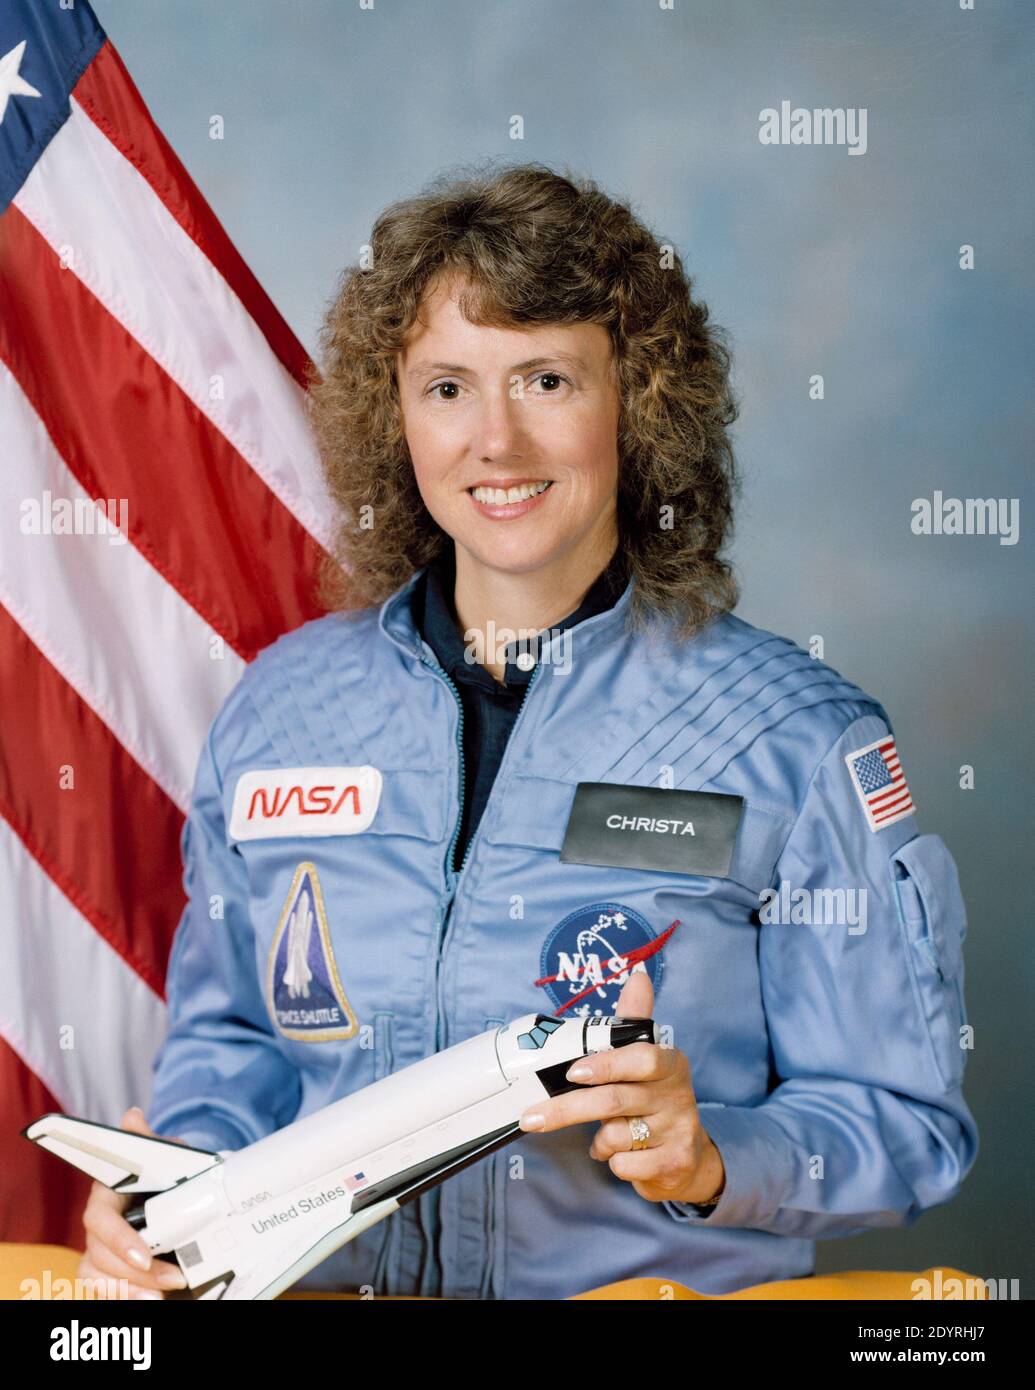 Sharon Christa McAuliffe (née Corrigan; September 2, 1948 – January 28, 1986) American teacher and astronaut and one of the seven crew members killed in the Space Shuttle Challenger disaster. Stock Photo